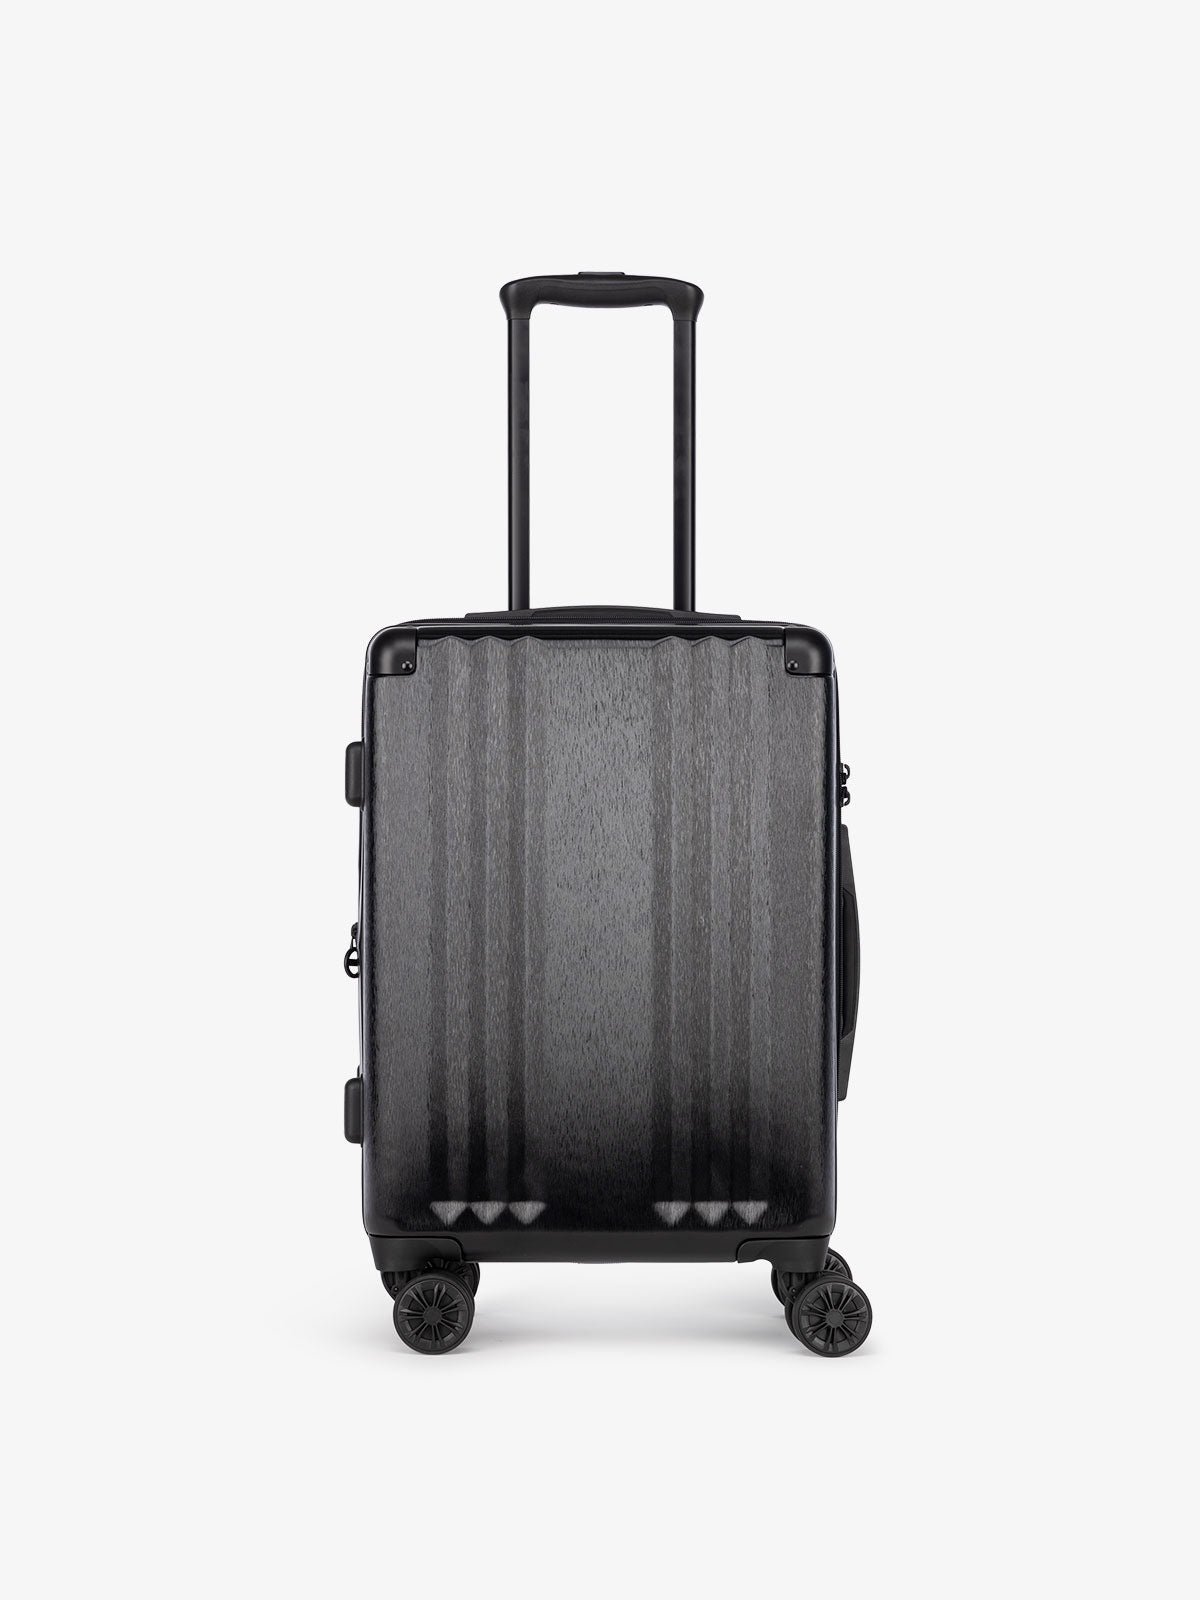 CALPAK Ambeur black 22 inch rolling spinner carry on luggage with TSA lock